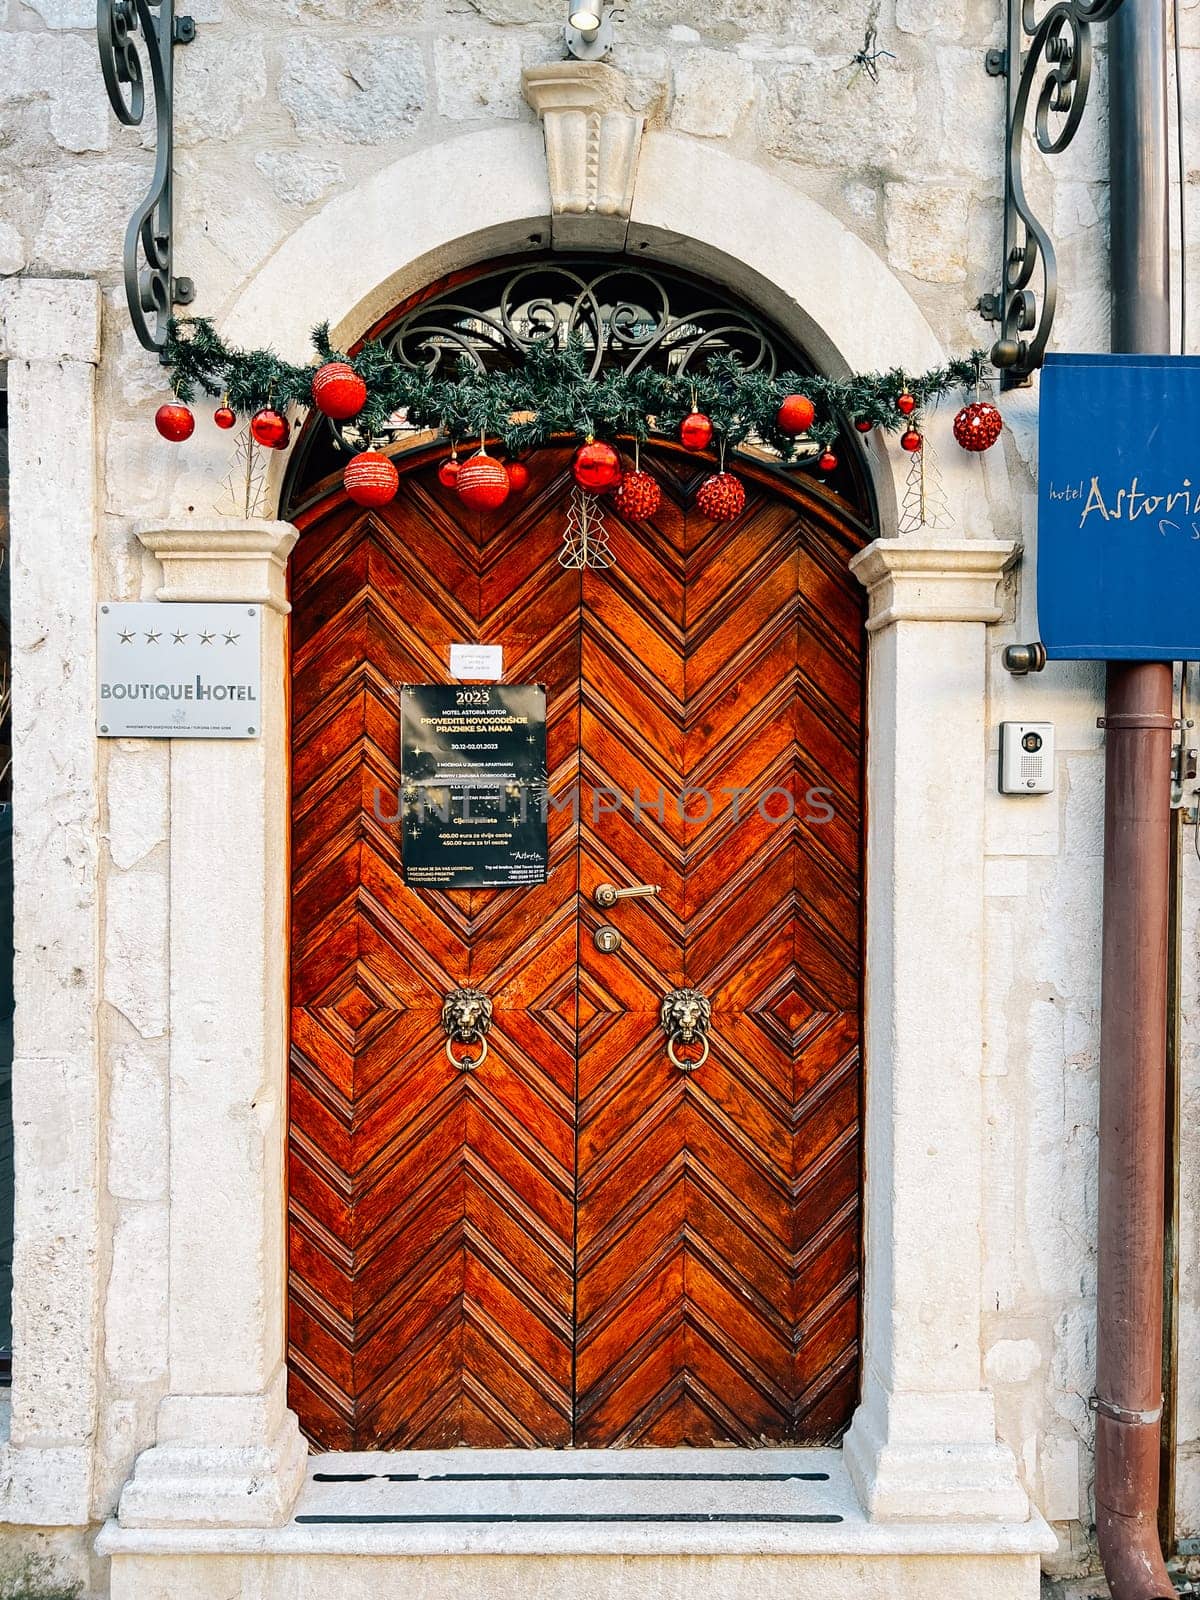 Kotor, Montenegro - 25 december 2022: Garlanded wooden door to an old building with a sign at the entrance. Caption: Boutique Hotel, Astoria by Nadtochiy